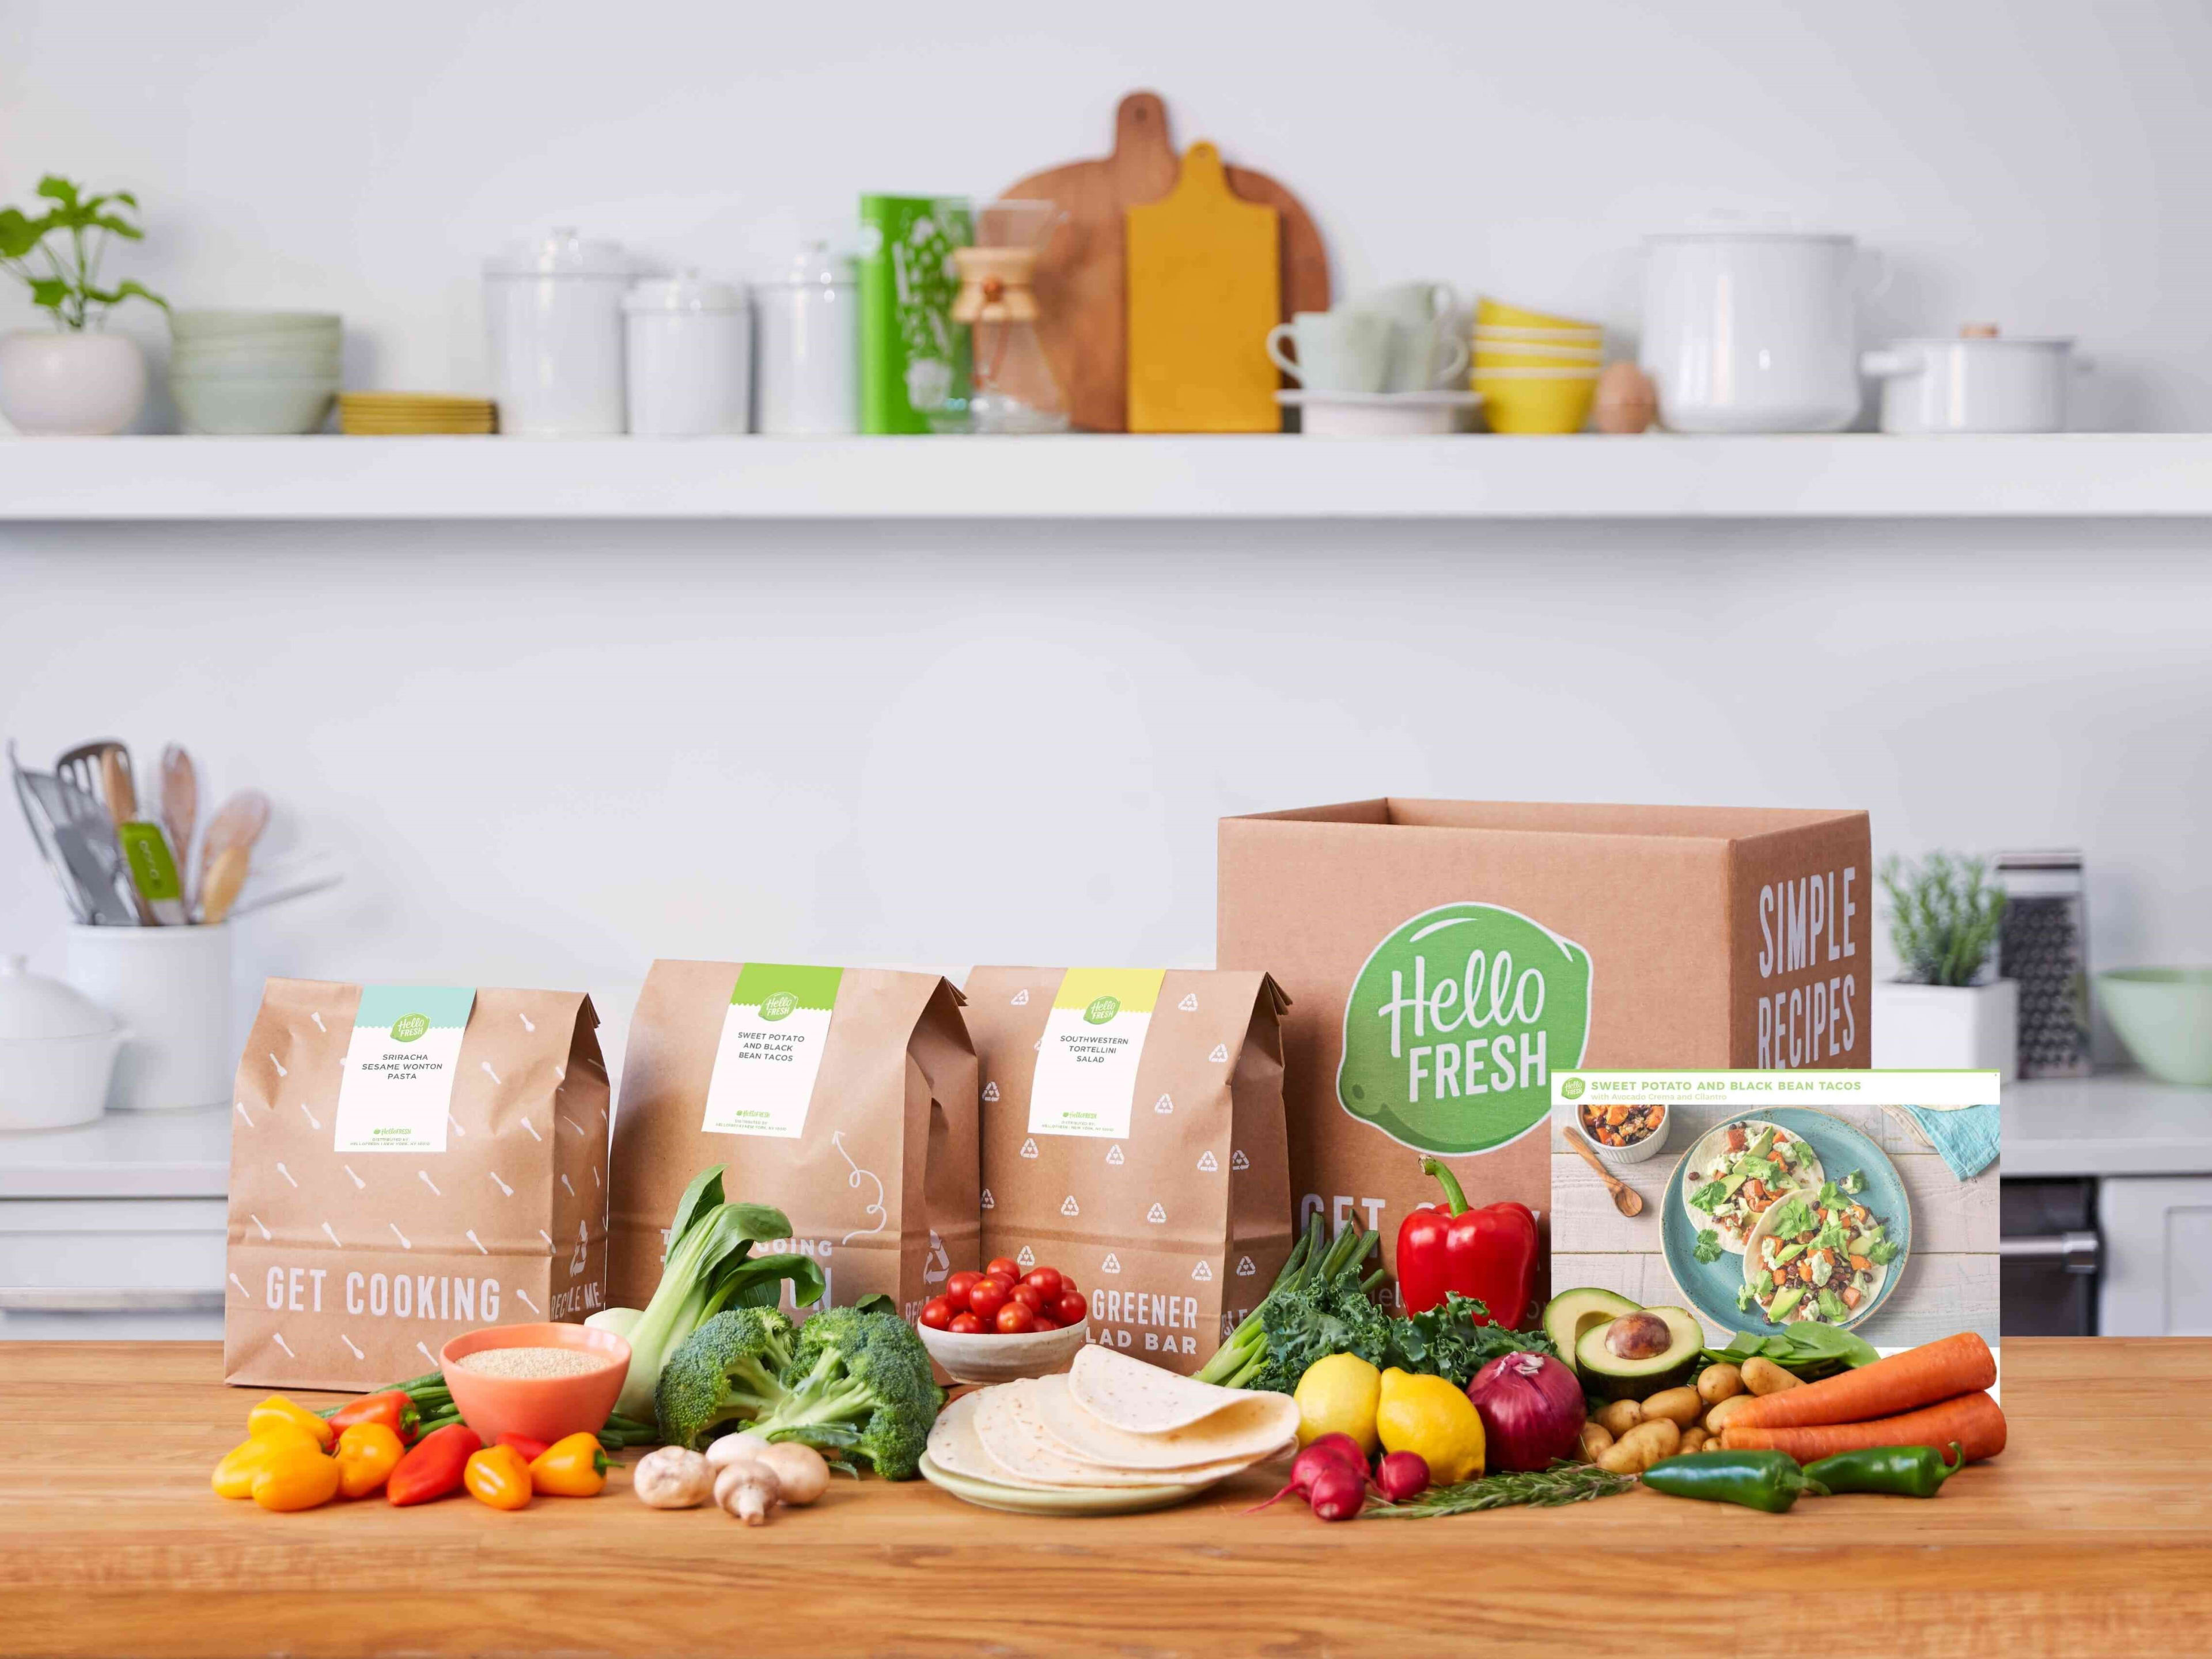 HelloFresh has the most recipe variety among meal kit services